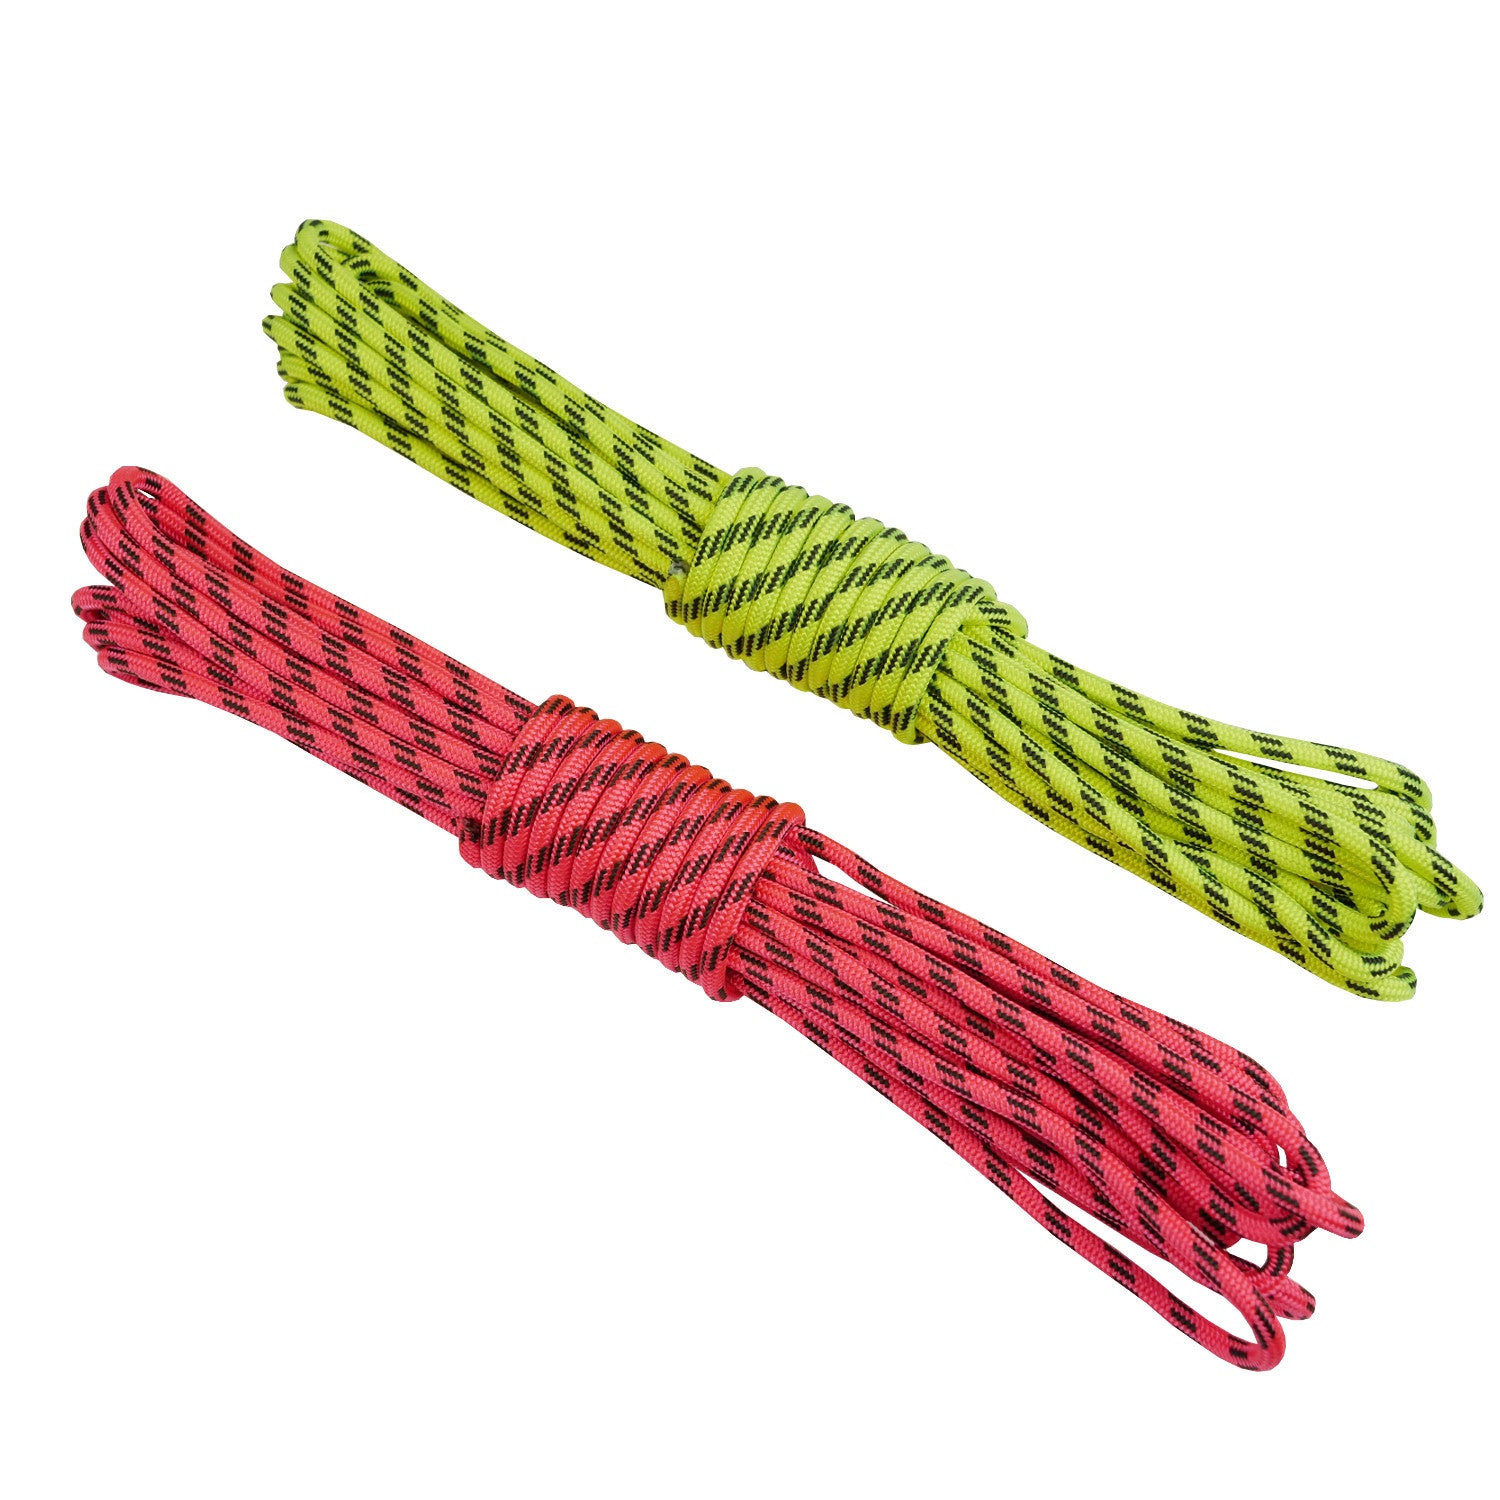 2 sets of Rock + Run Accessory cord 4mm yellow and pink